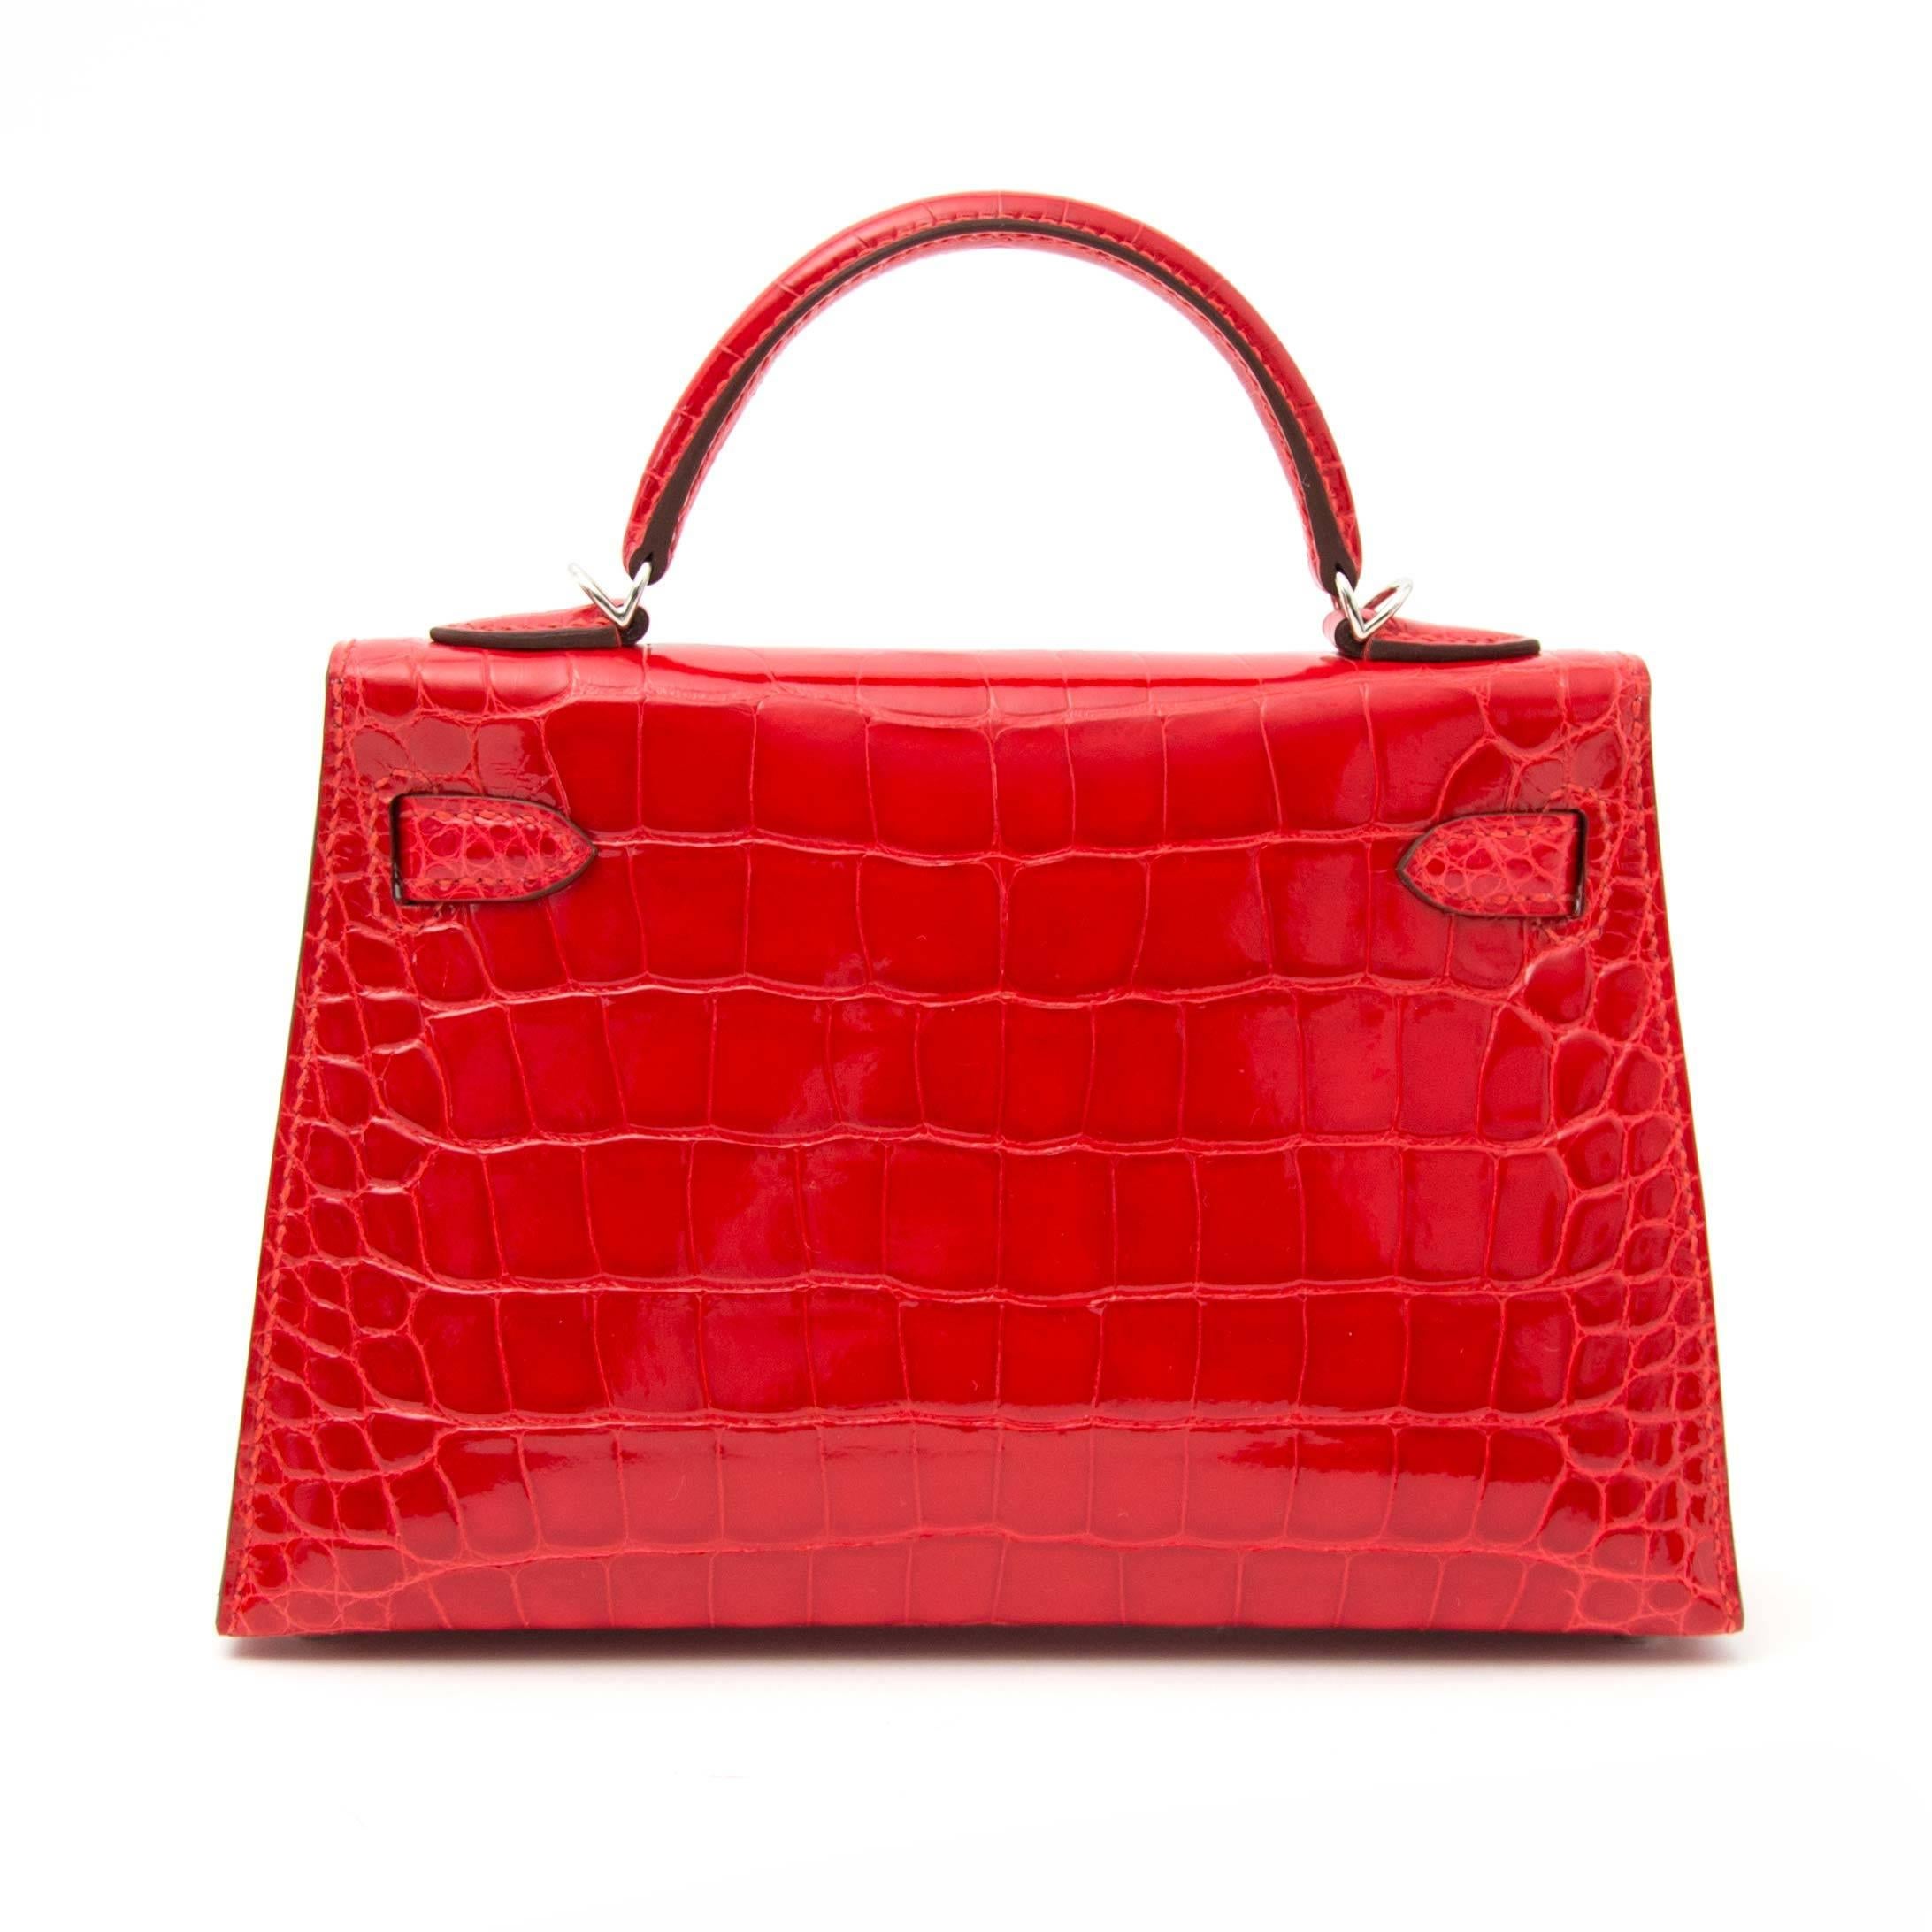 Never used

Hermes Geranium Sellier Kelly Mini 20cm Shiny Mississippiensis Alligator PHW

The talk about town Hermes Limited Edition Kelly Mini in Shiny Vibrant red toned 